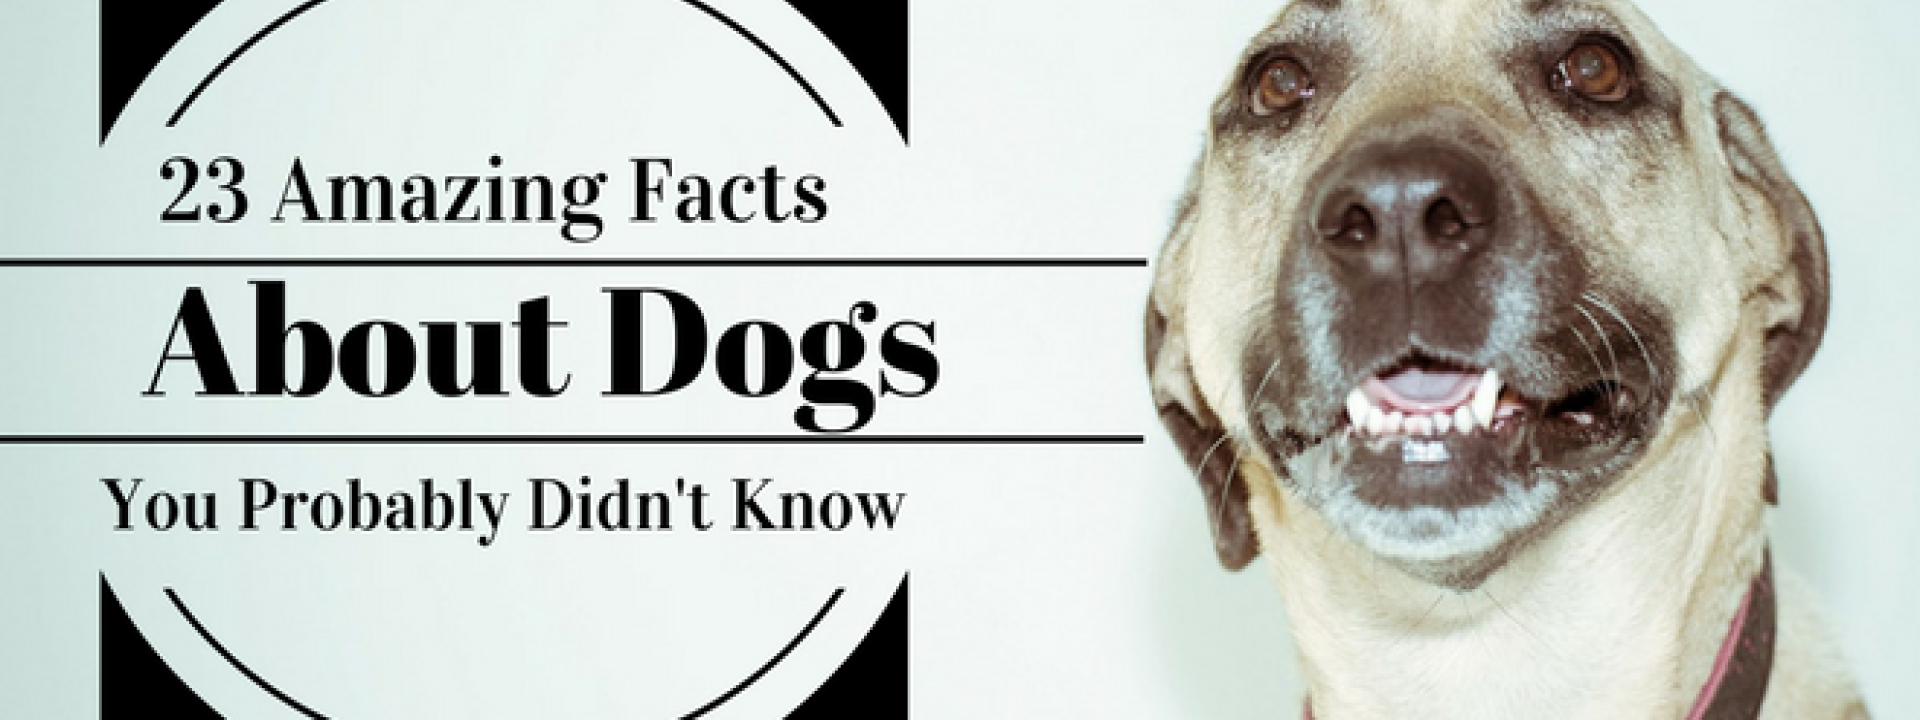 23 Amazing Facts About Dogs